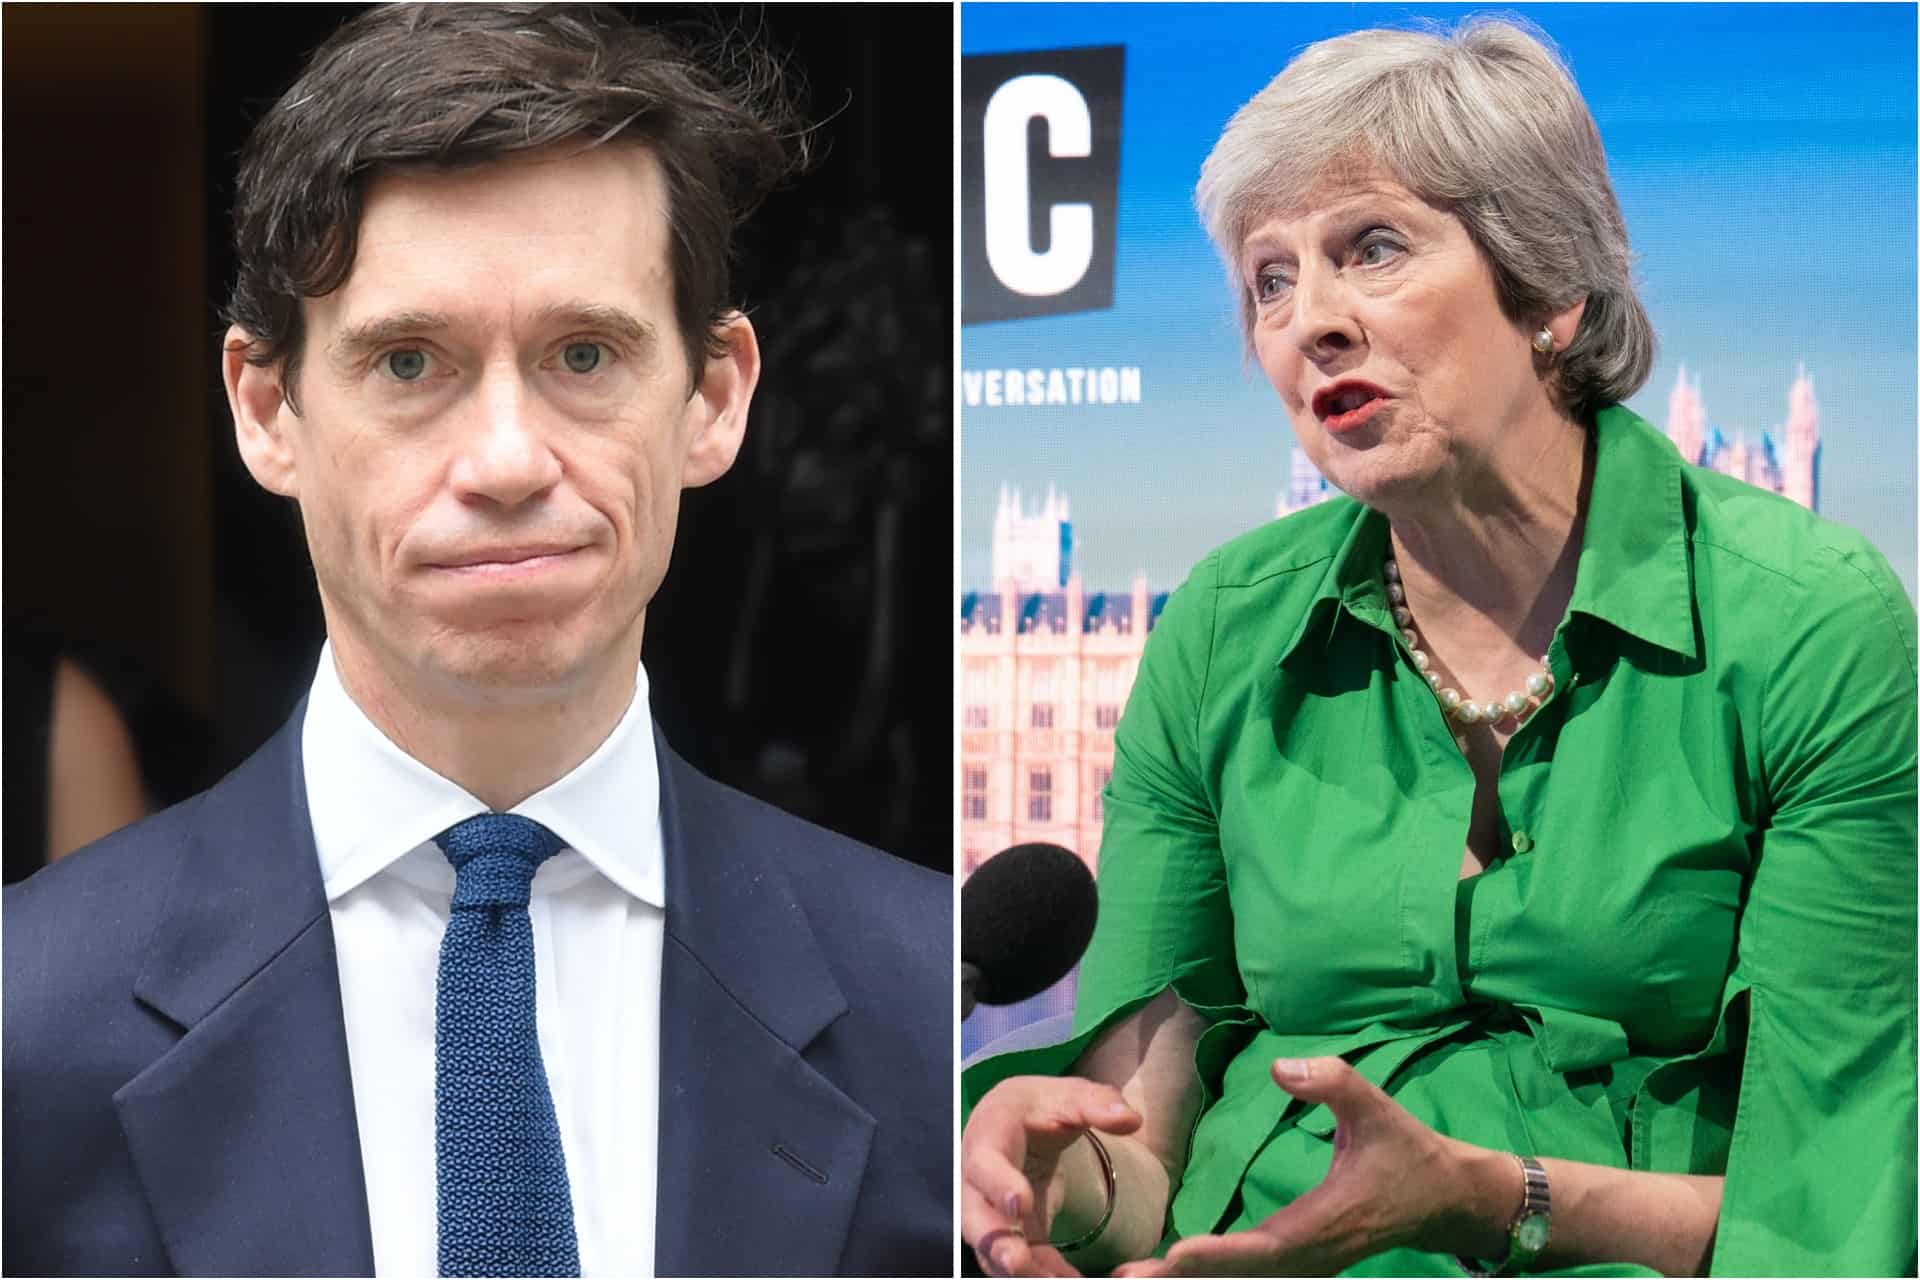 Rory Stewart and Theresa May in the running for top job